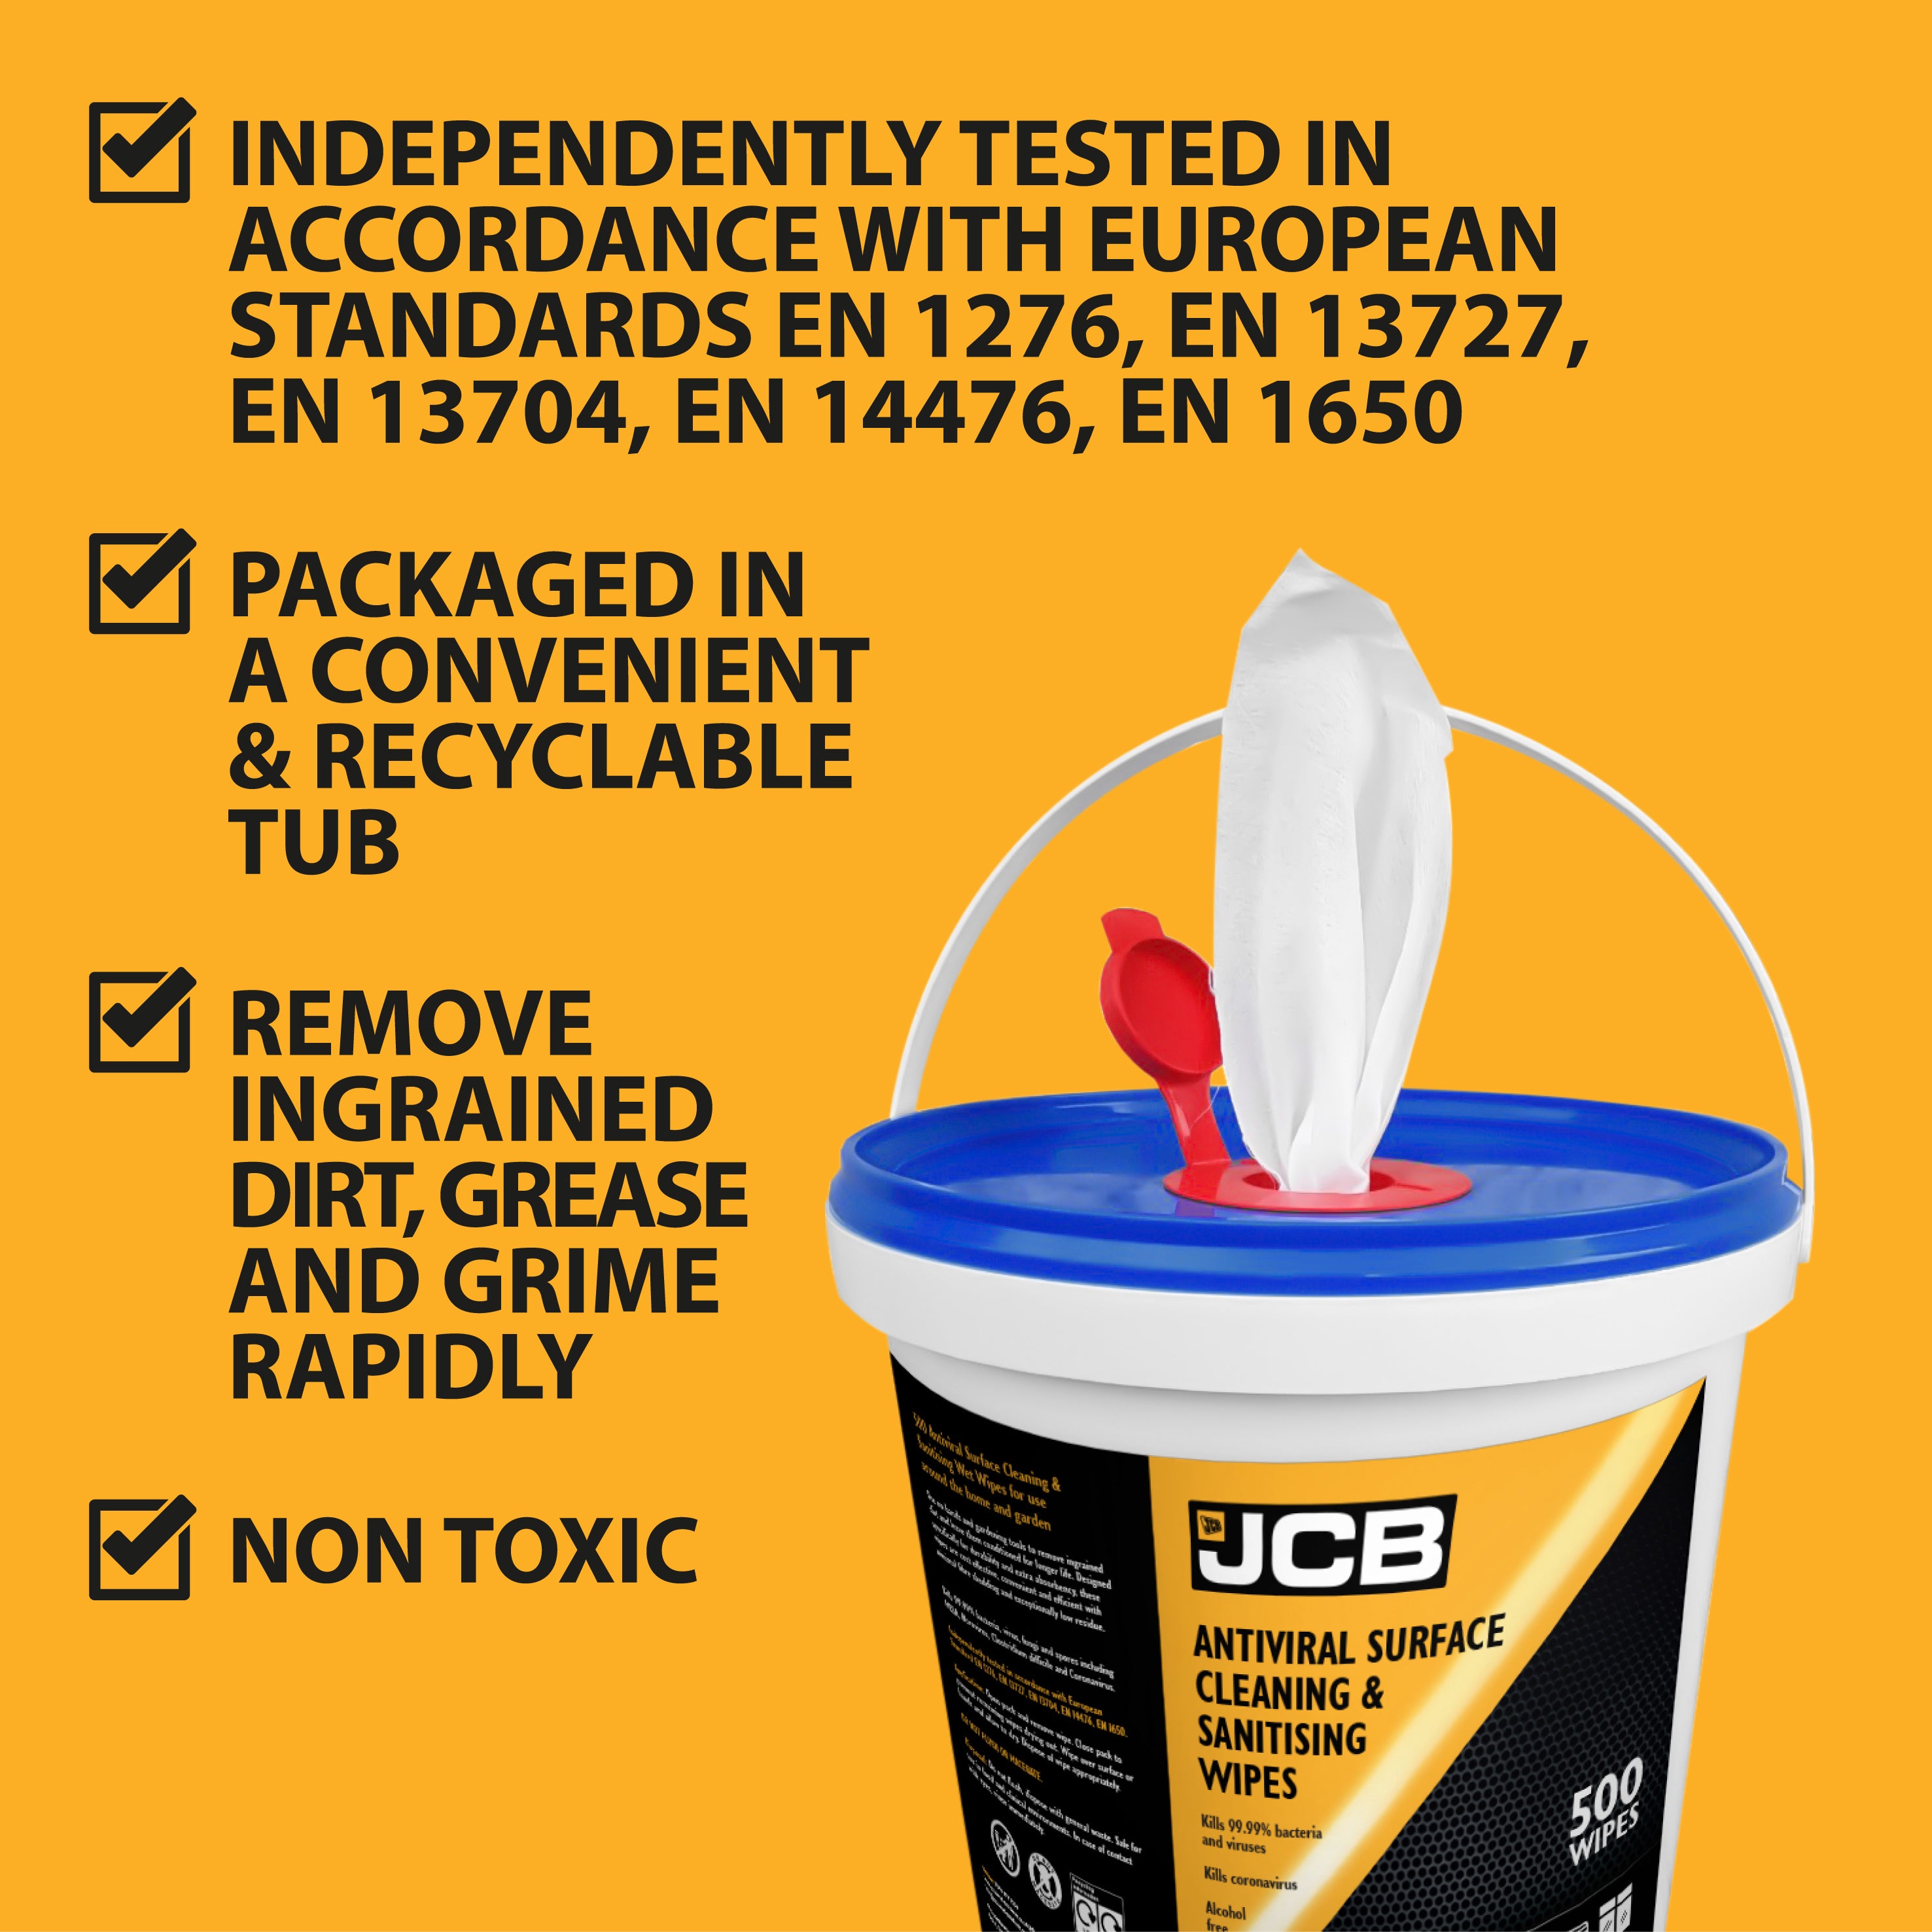 JCB Antiviral Surface Cleaning & Sanitising Wipes (500 wipes)